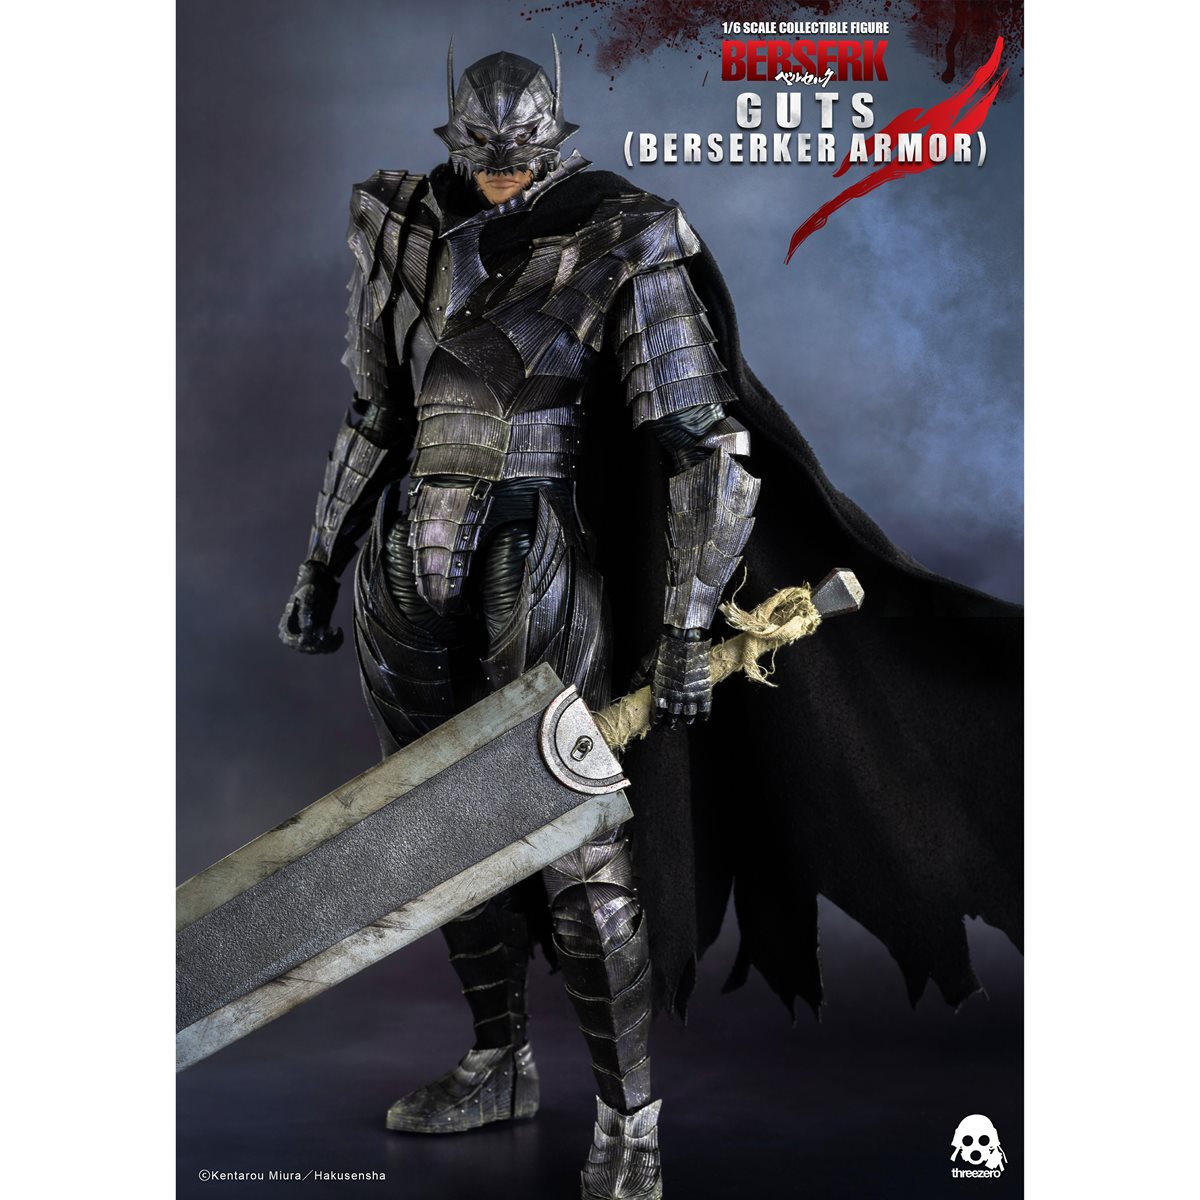 1 6th scale collectible figure